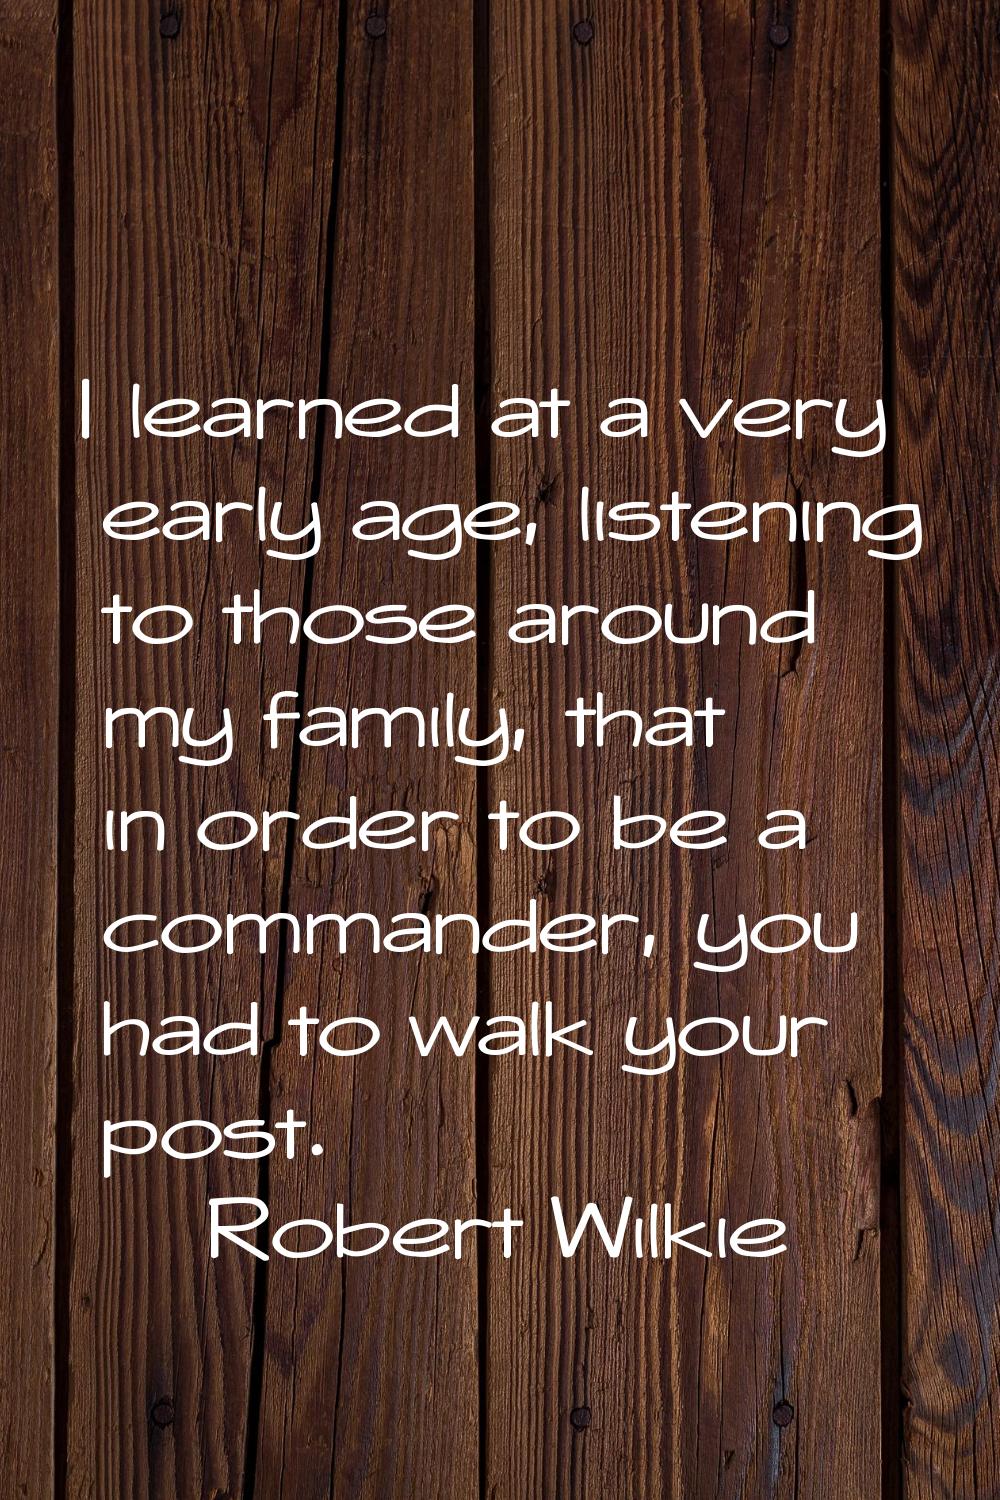 I learned at a very early age, listening to those around my family, that in order to be a commander